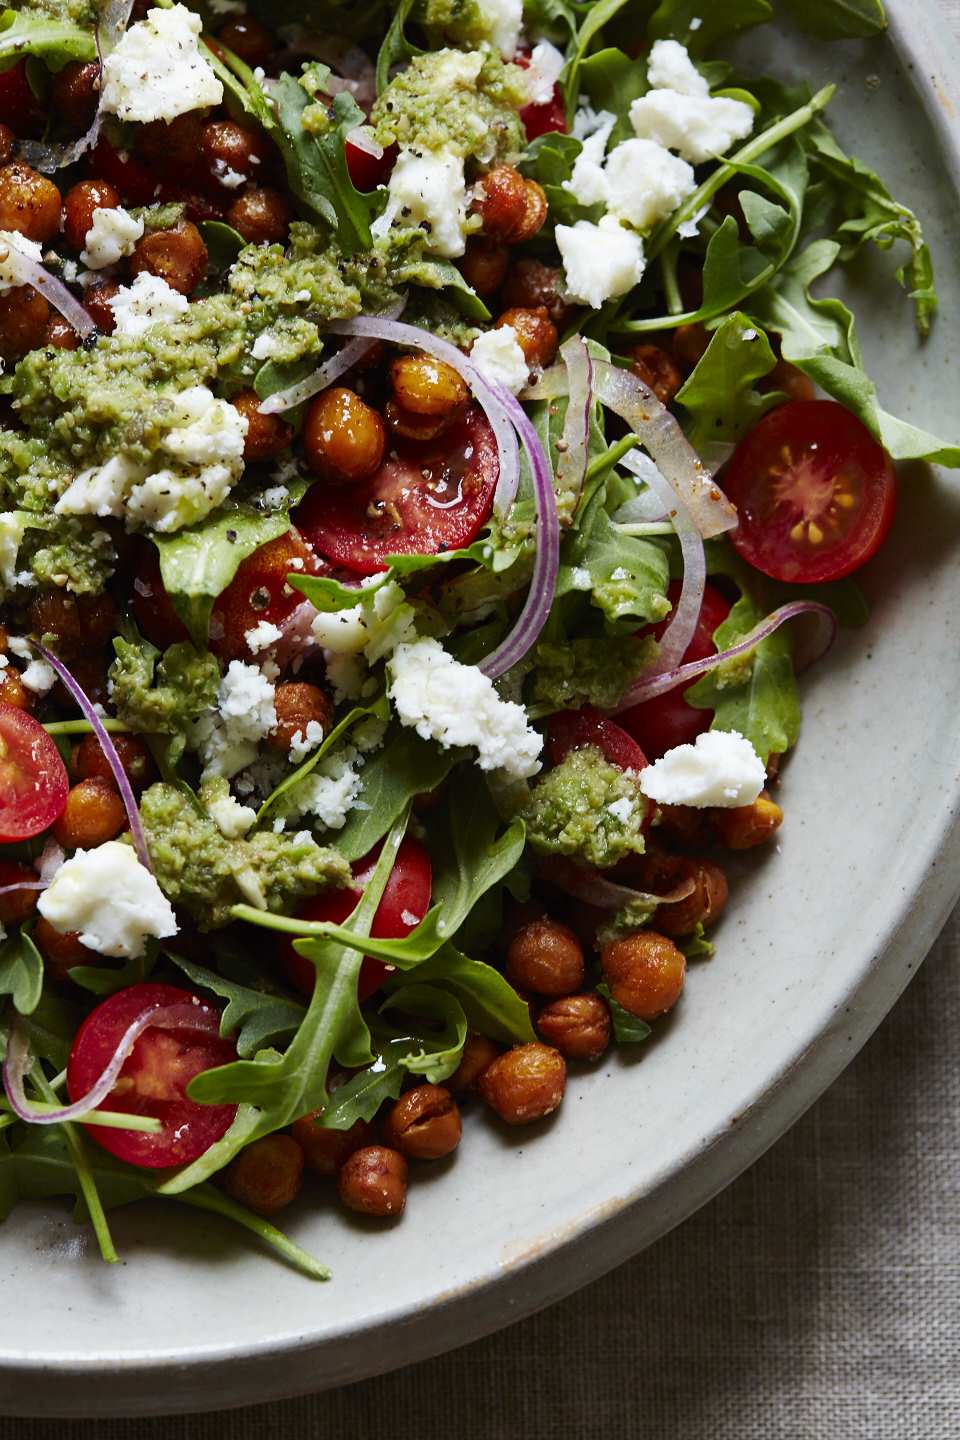 Roasted Chickpea Bowl with Green Olive Tapenade (GF, V)